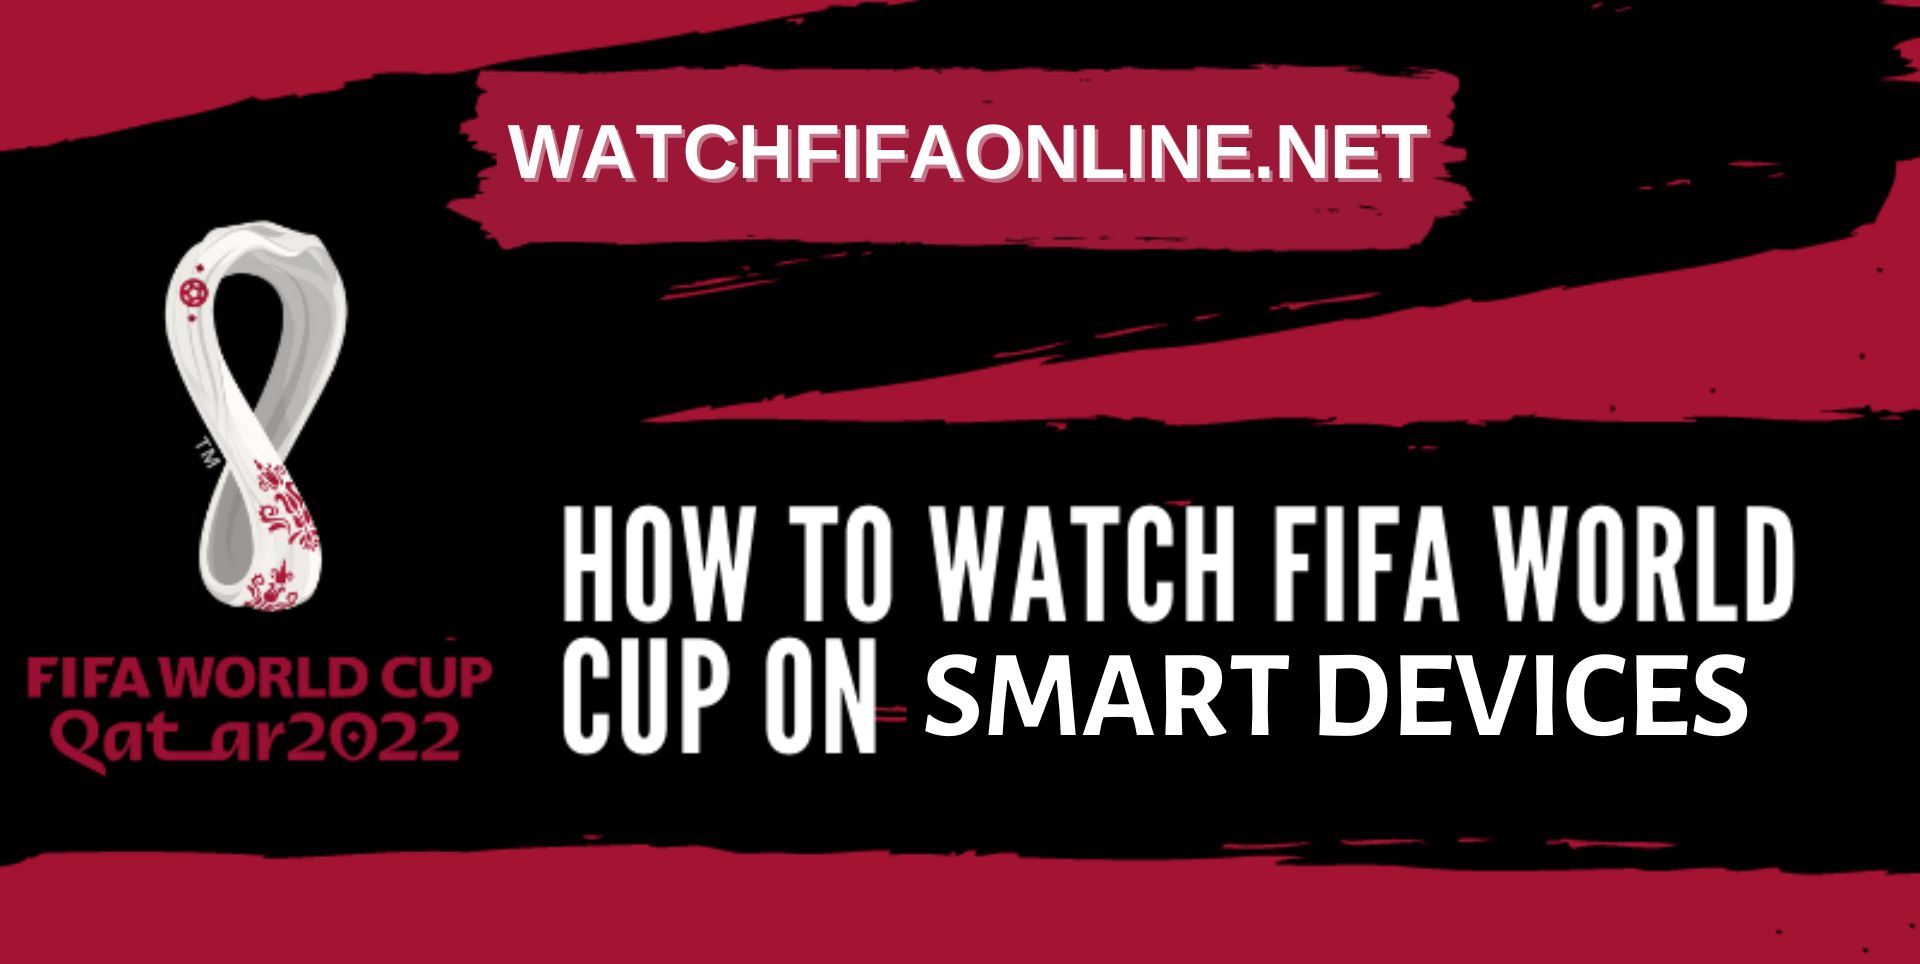 watch-live-matches-streaming-on-watch-fifa-online